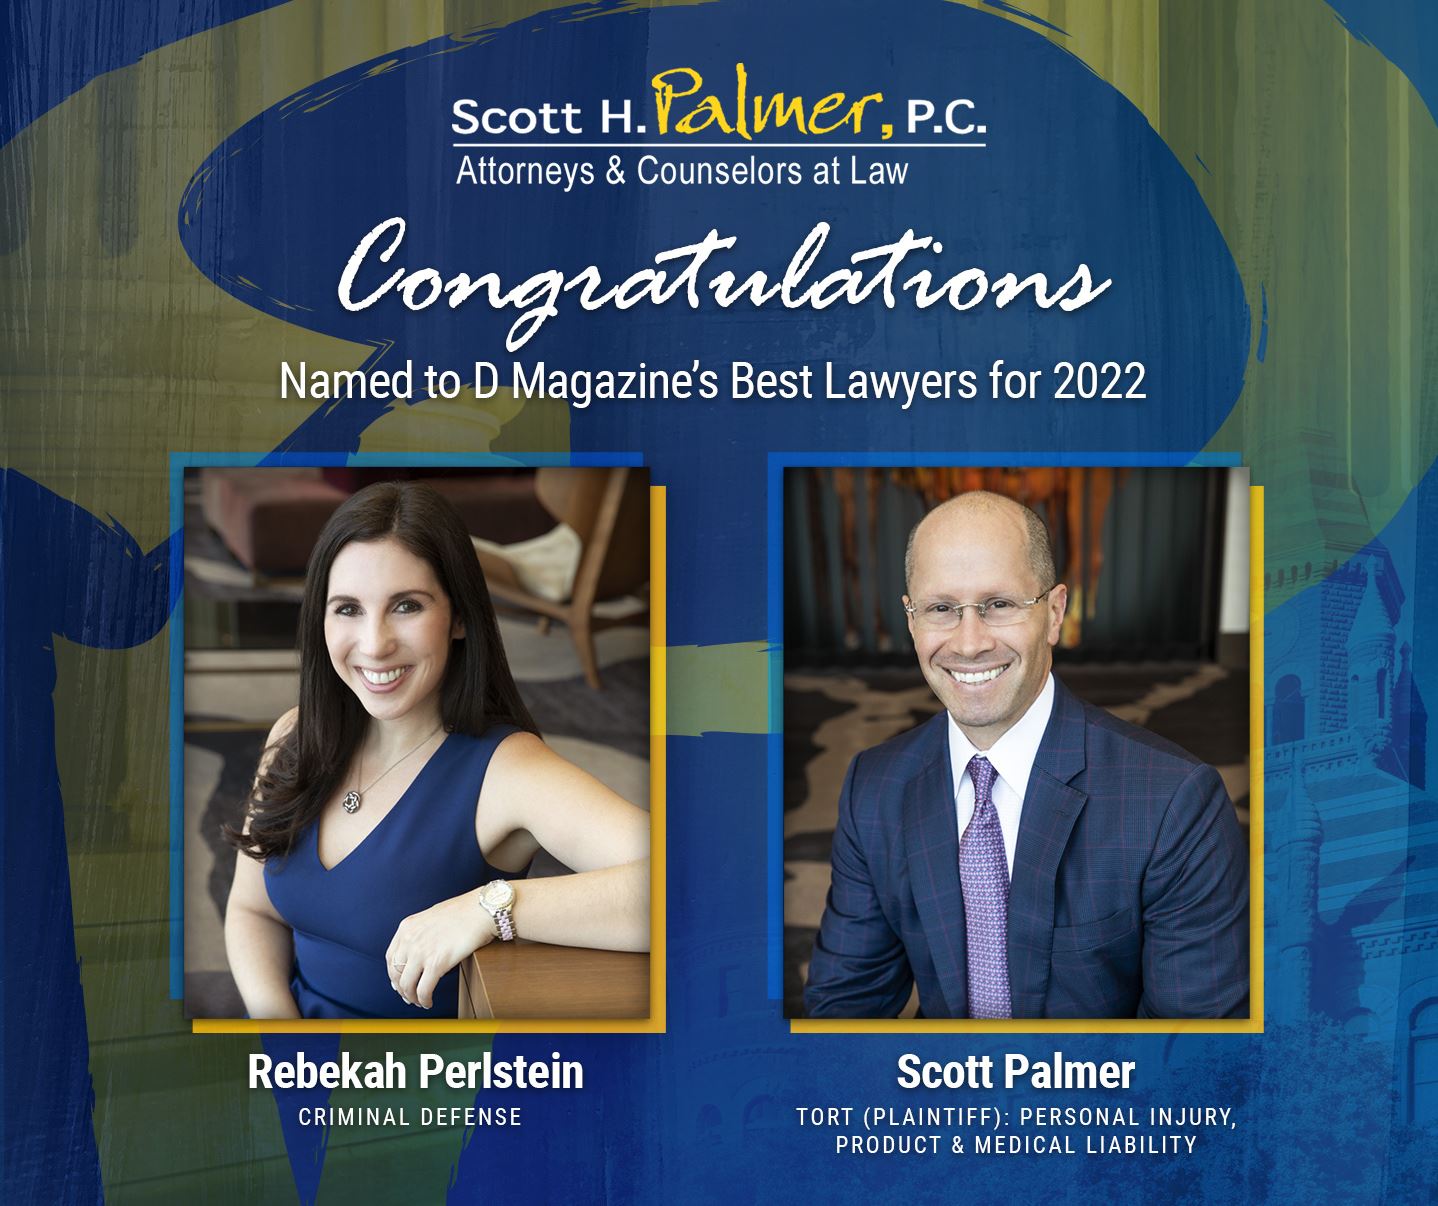 Congratulatory messages for Attorneys Perlstein and Palmer